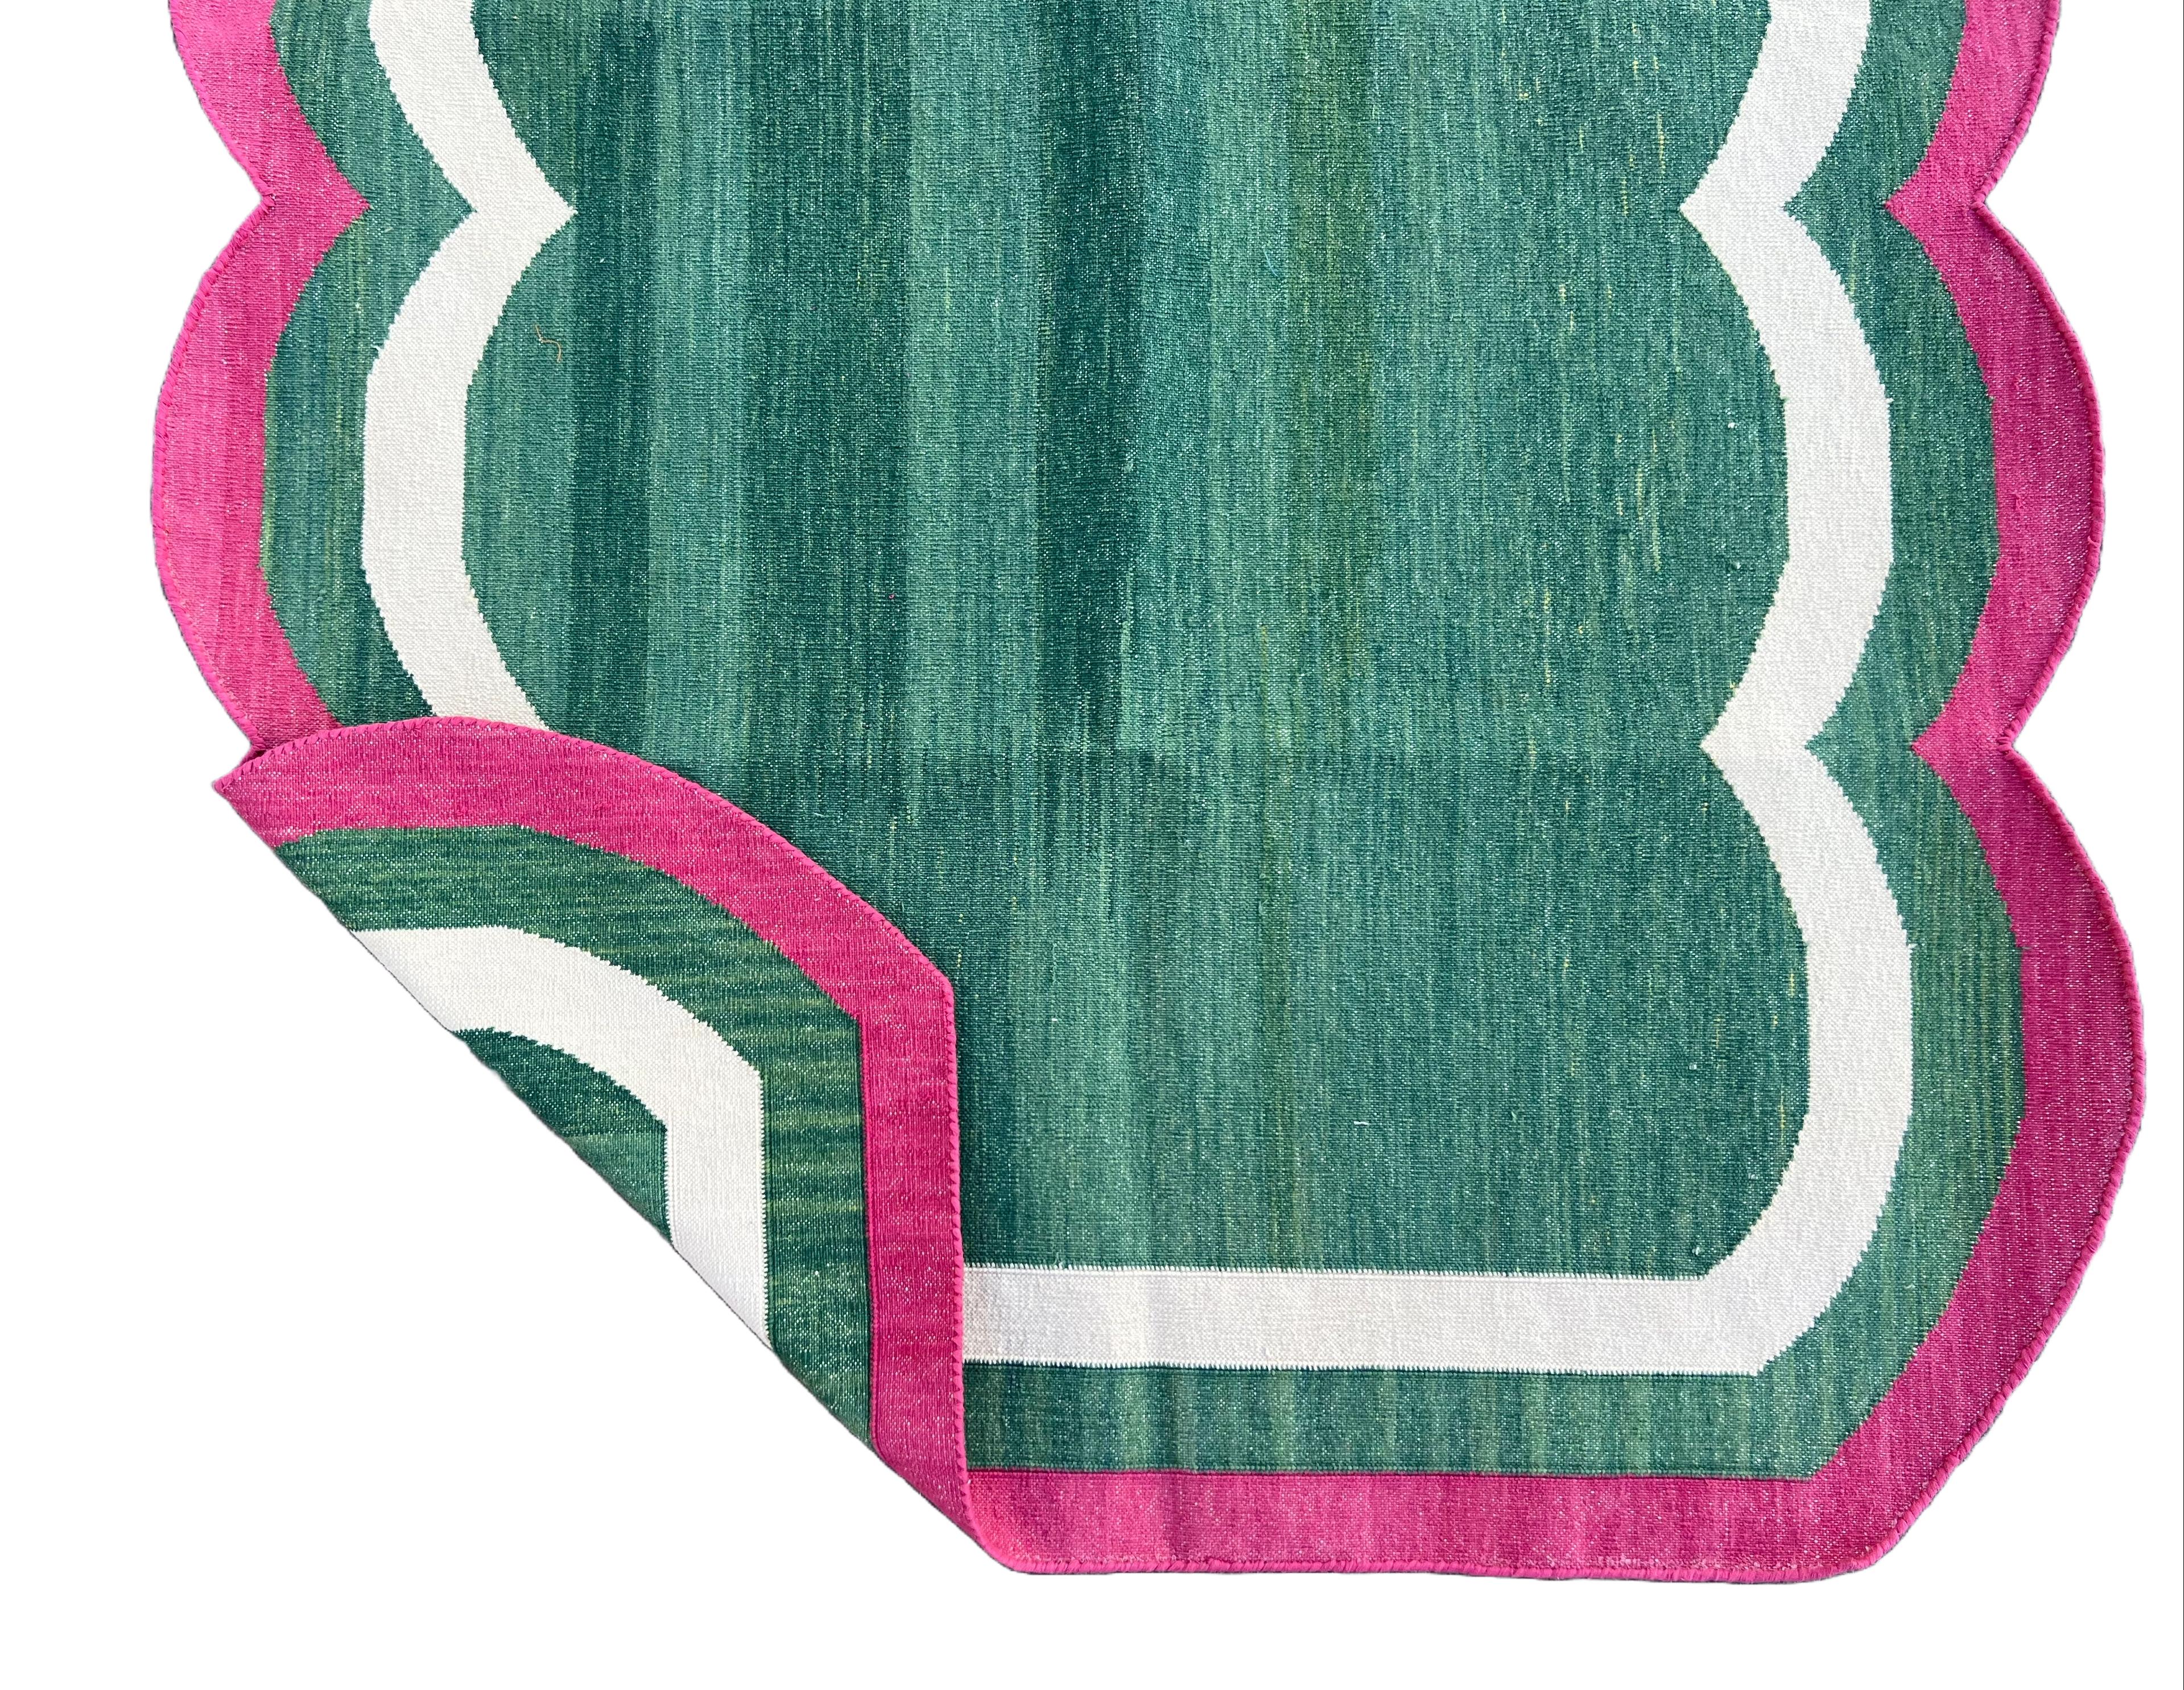 Cotton Vegetable Dyed Forest Green, Cream And Raspberry Pink Scalloped Striped Indian Dhurrie Rug-3'x5' (Scallops runs on 5' sides)

These special flat-weave dhurries are hand-woven with 15 ply 100% cotton yarn. Due to the special manufacturing